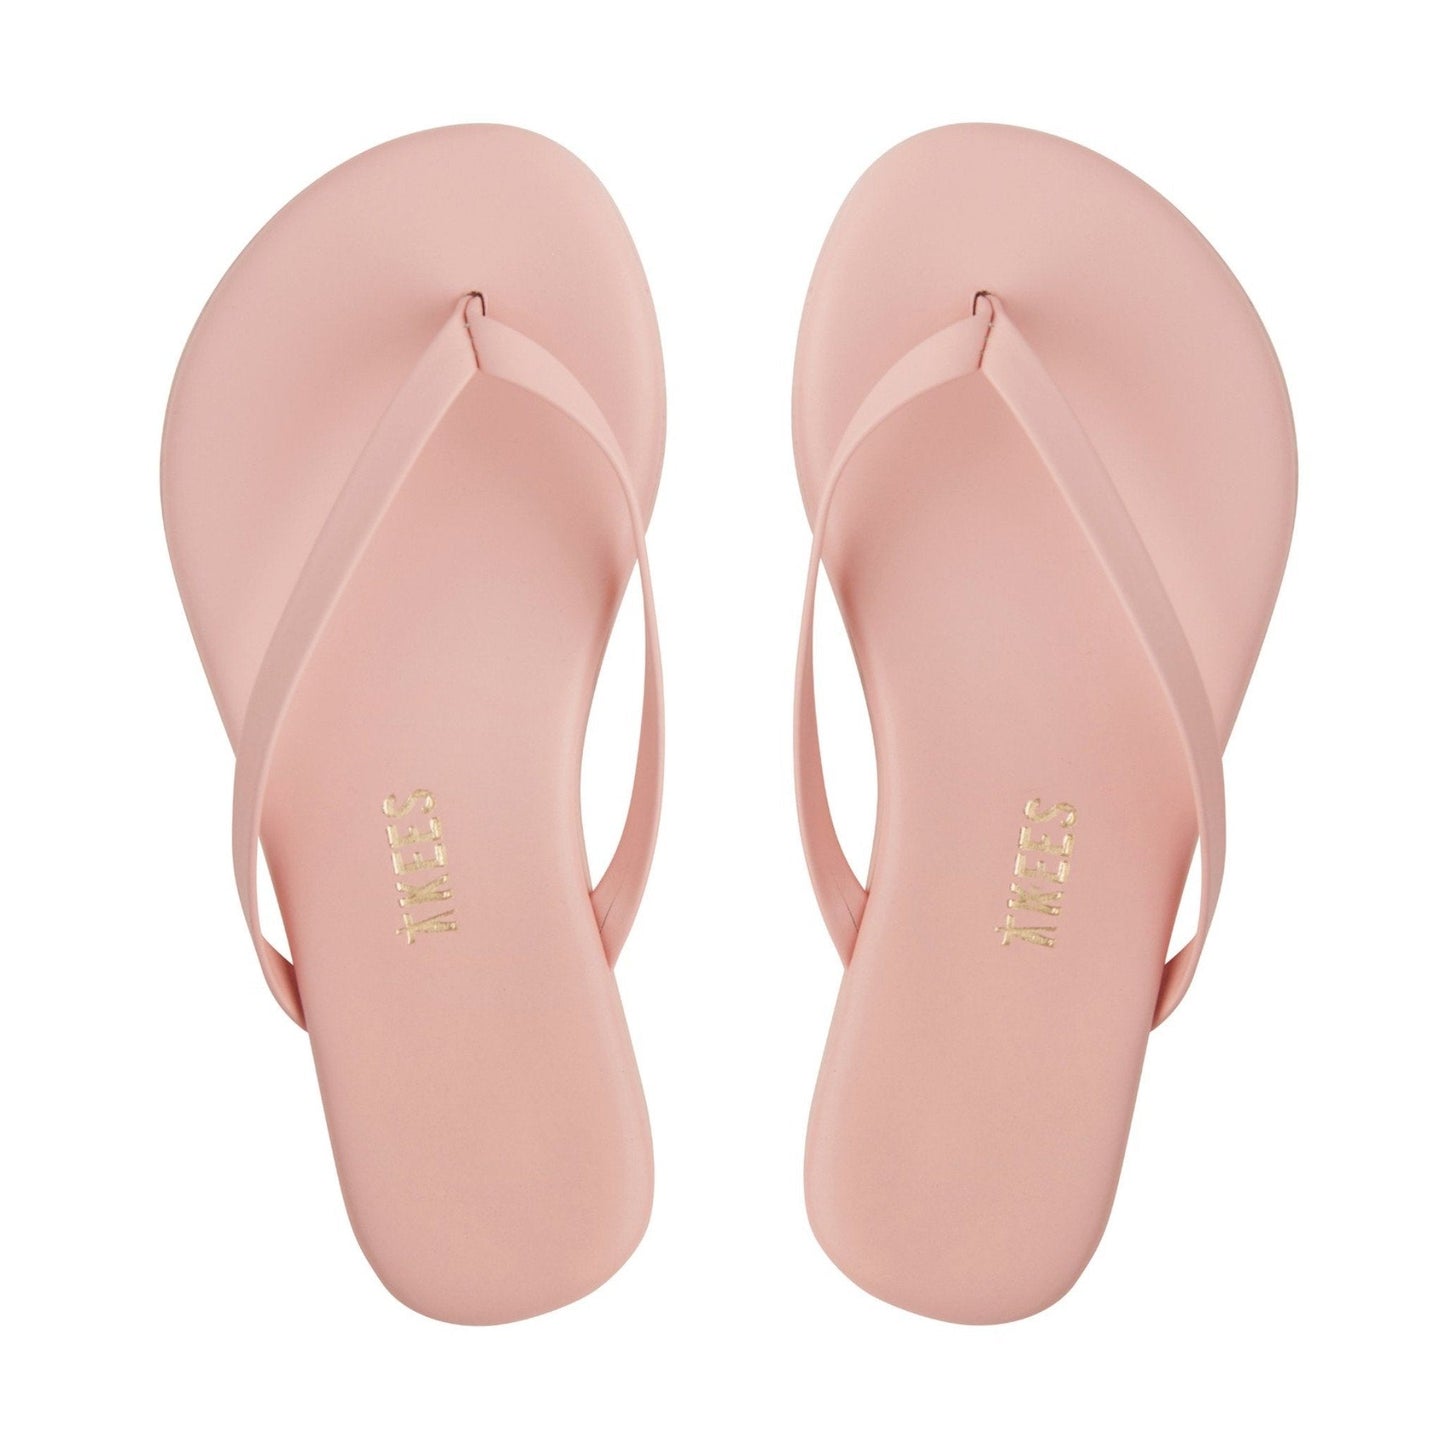 Tkees So Pretty Mini Solid Slides - a Spirit Animal - Flip Flops $30-$60 1 active May 2023